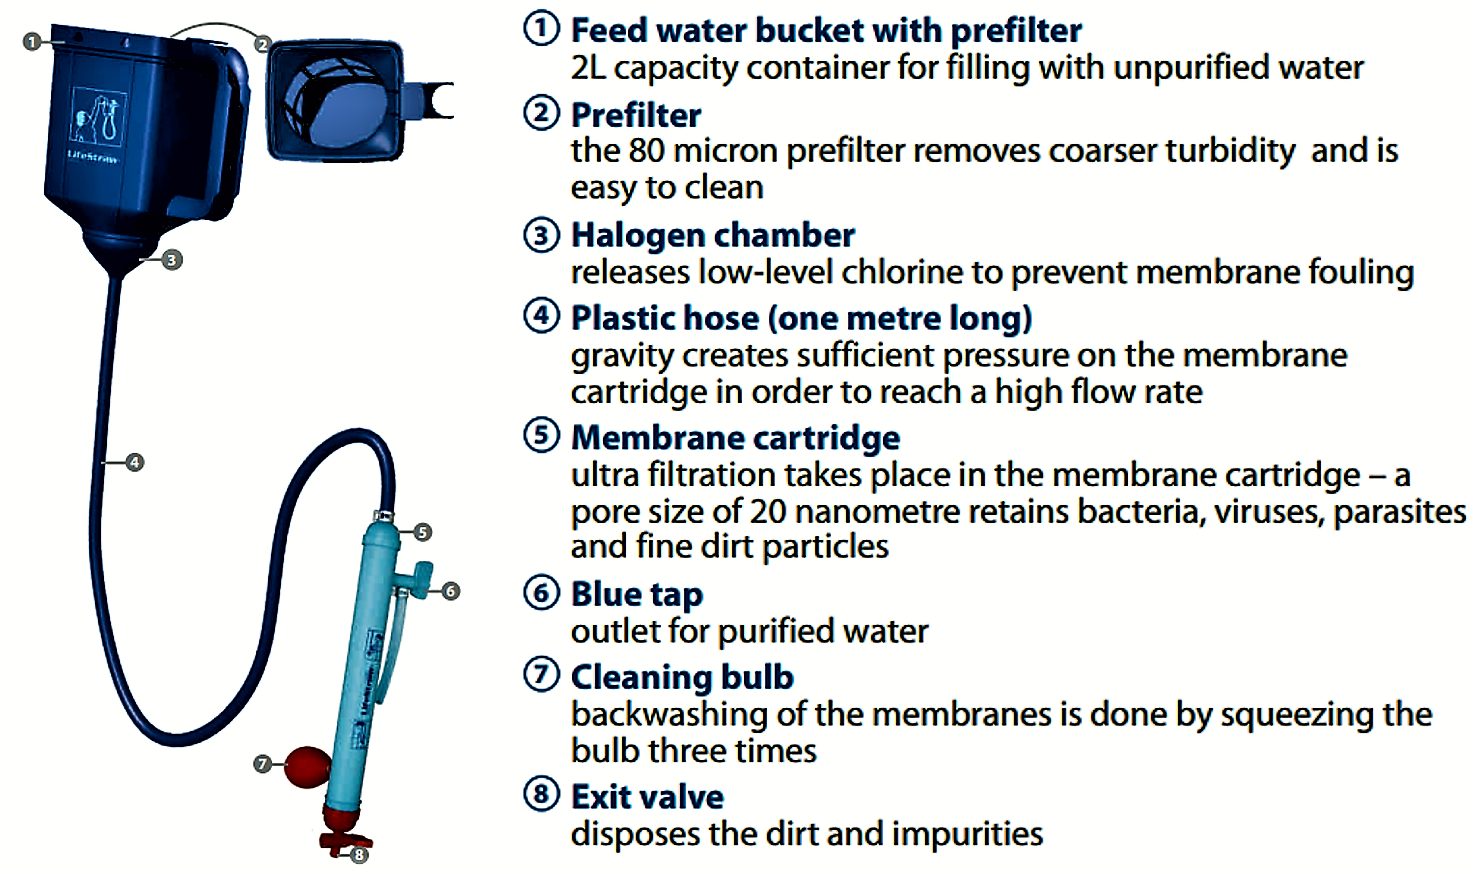 The components of the Lifestraw®Family. Source: VESTERGAARD FRANDSEN (2011)